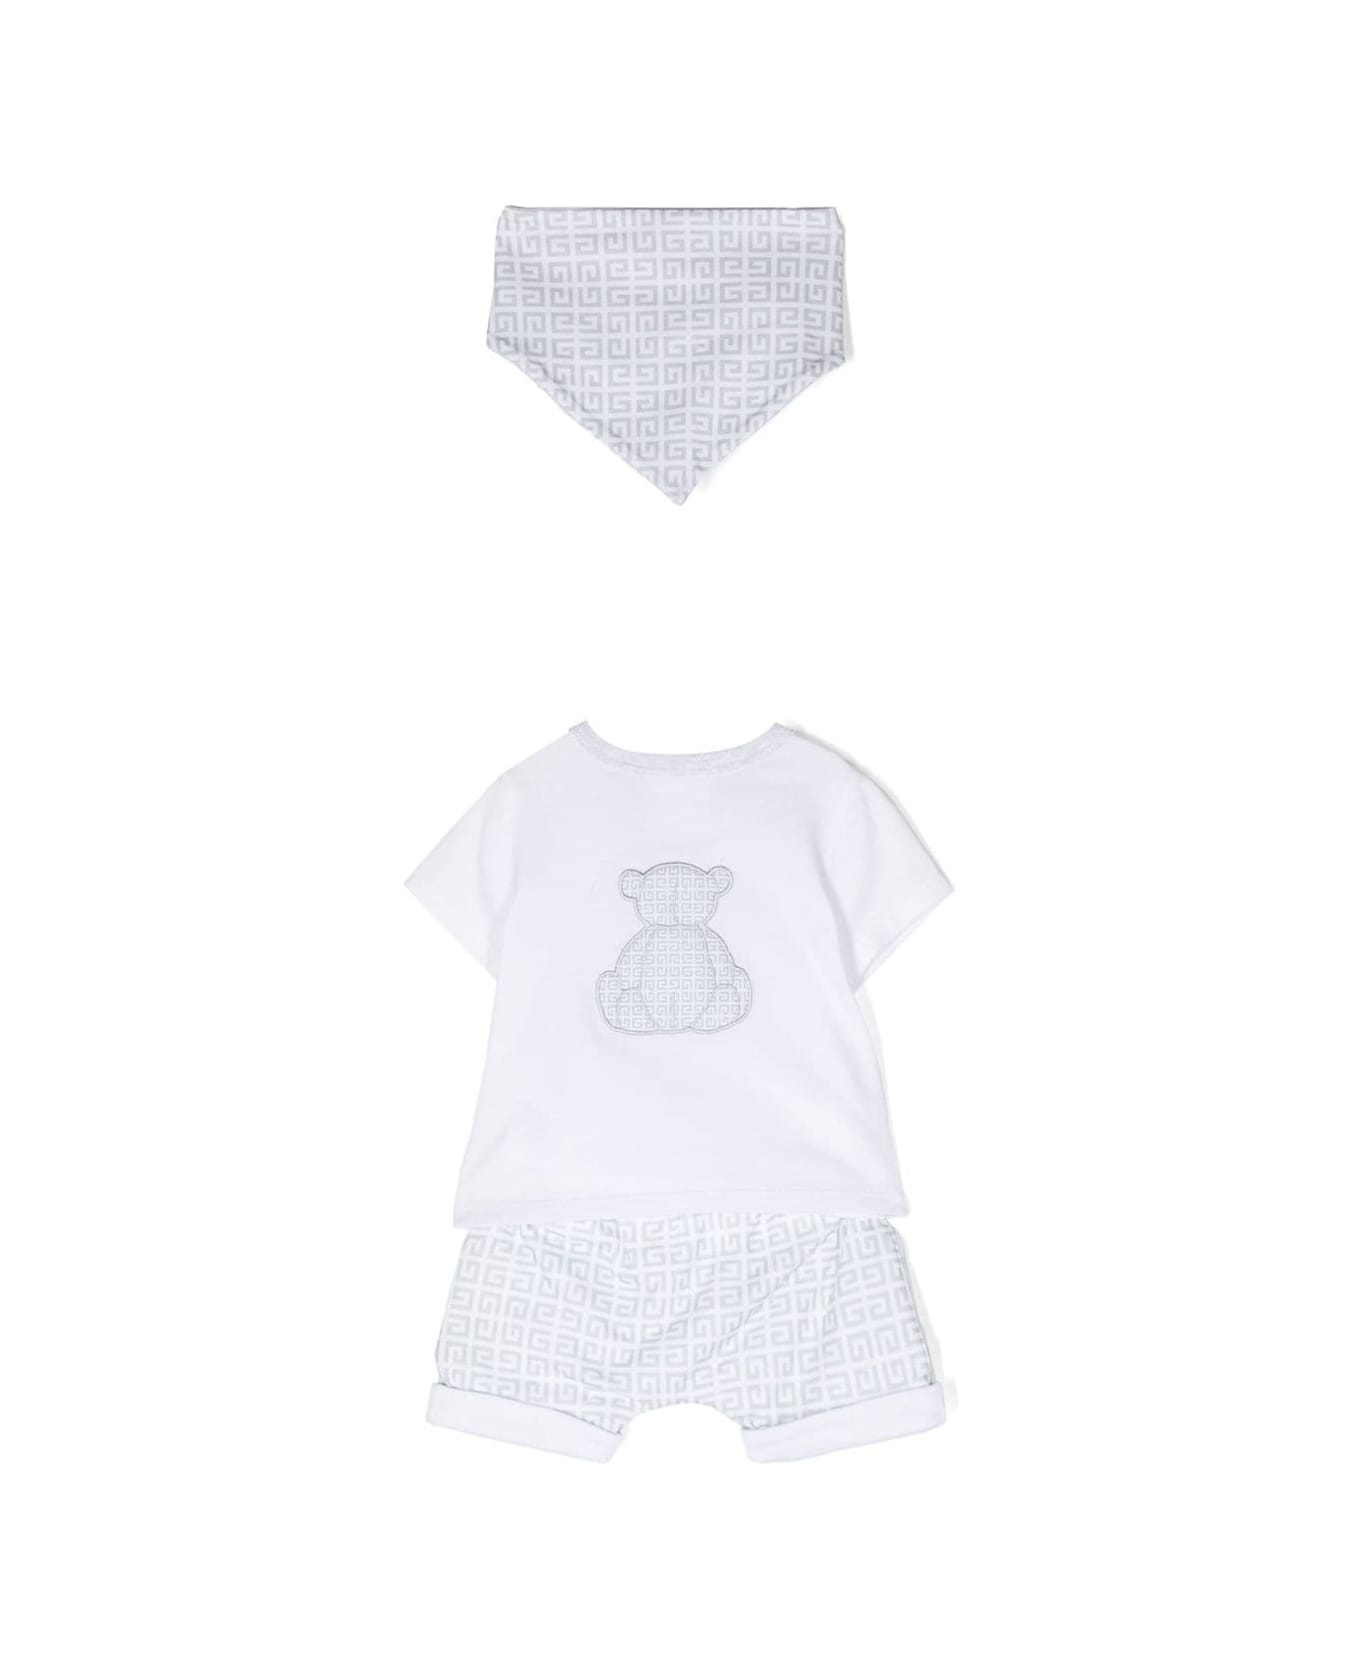 Givenchy T-shirt Shorts And Bandana Set With Printed 4g Logo All-over White In Cotton Baby - White